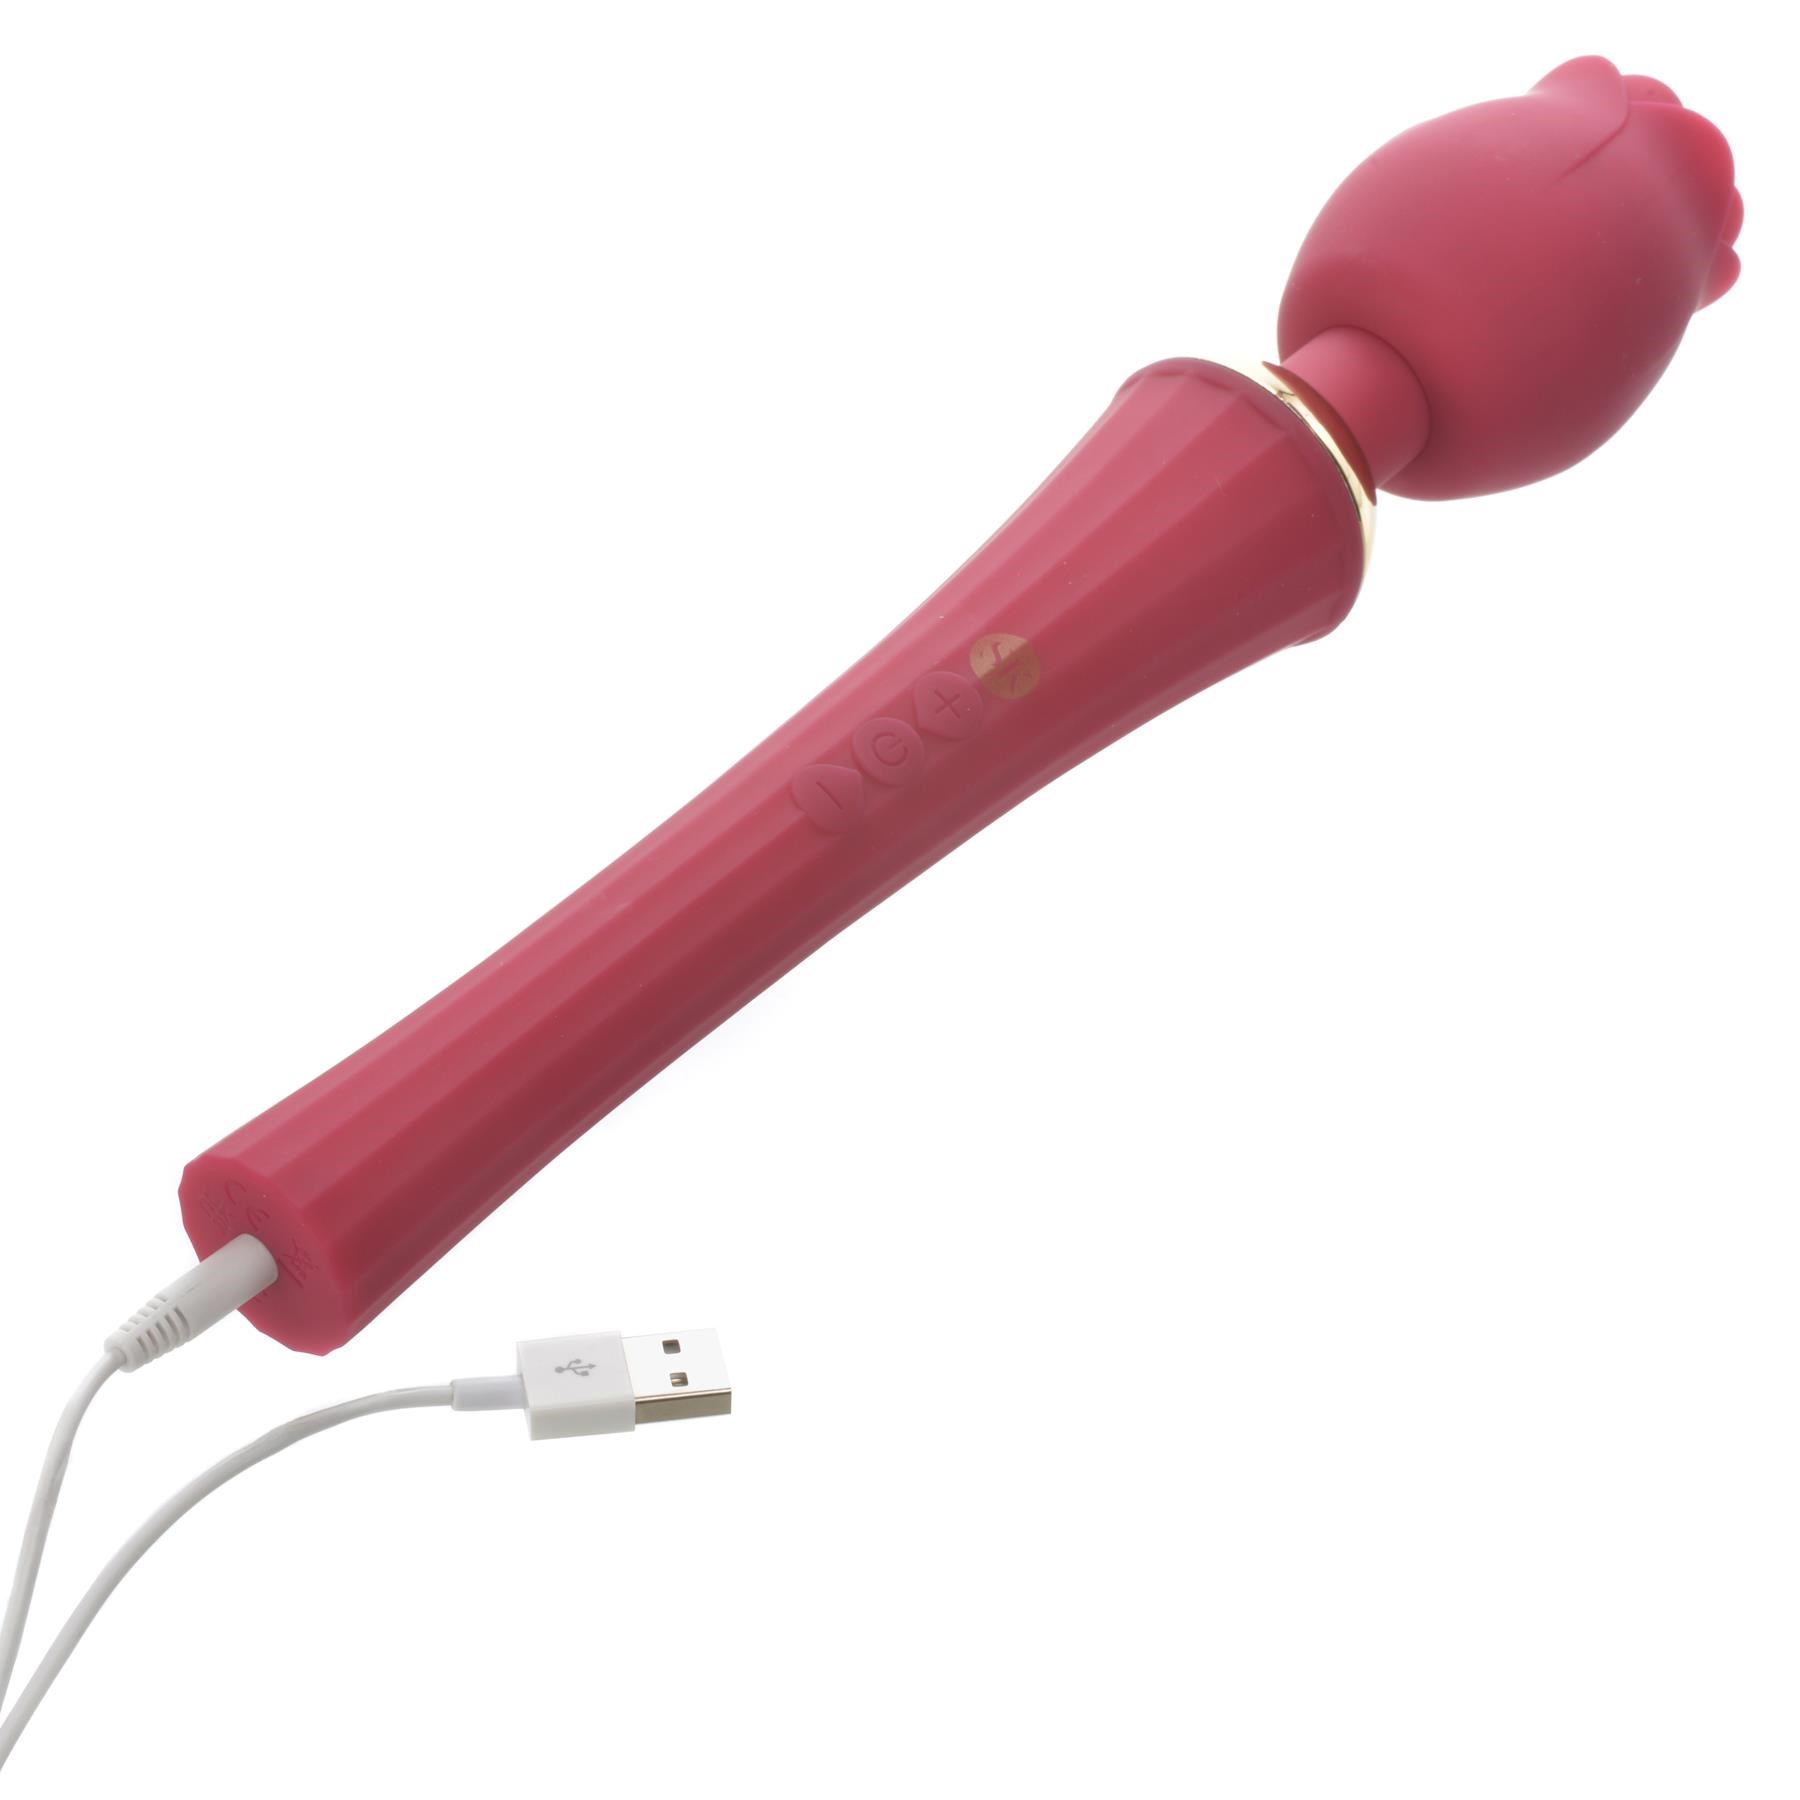 Rosegasm Bouquet Rose Wand Massager - Showing Where Charging Cable is Placed